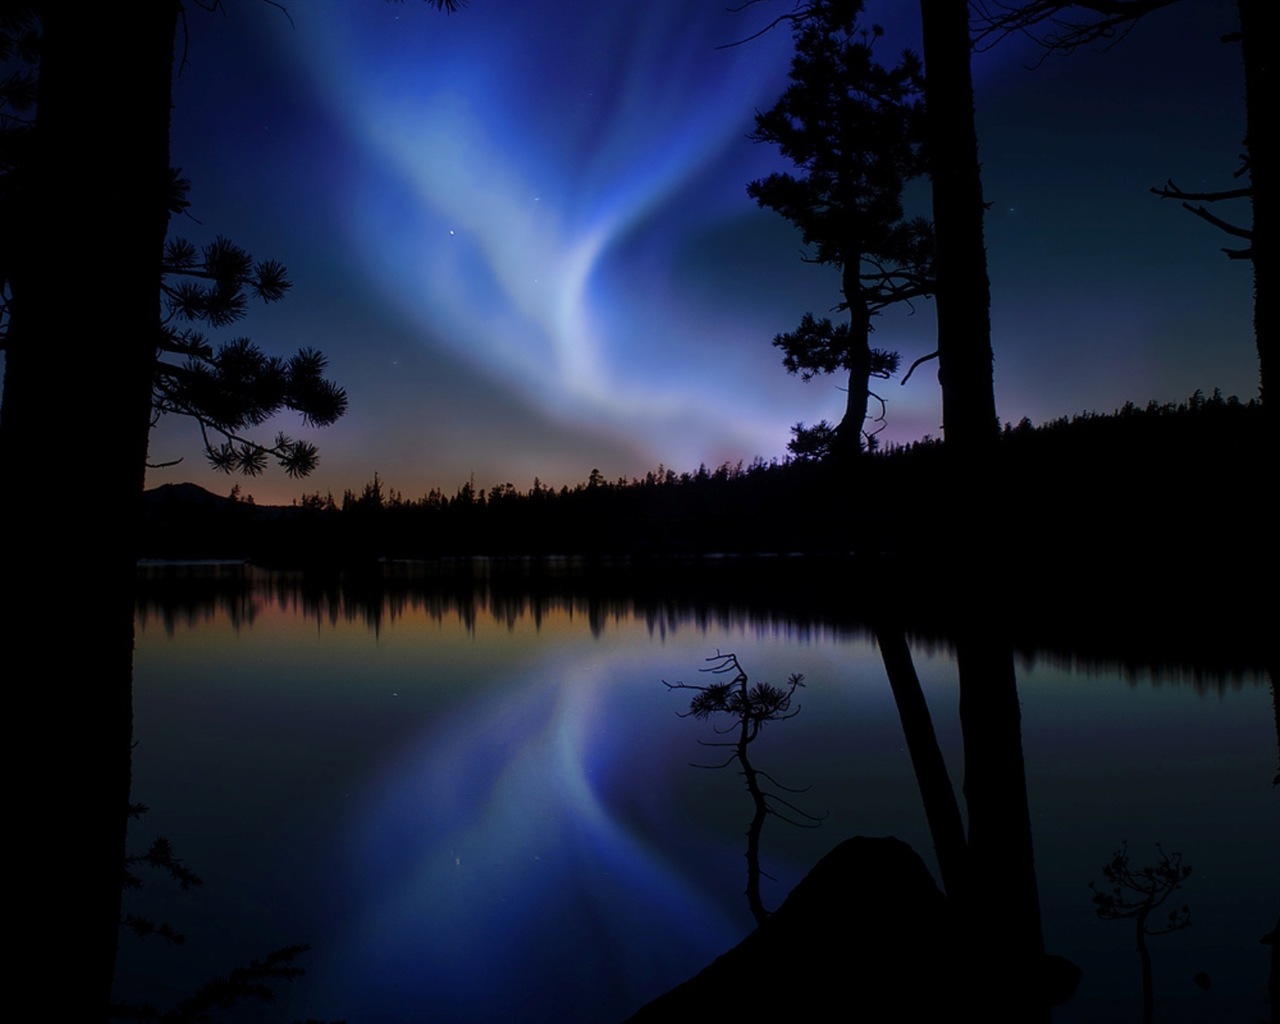 Natural wonders of the Northern Lights HD Wallpaper (1) #11 - 1280x1024